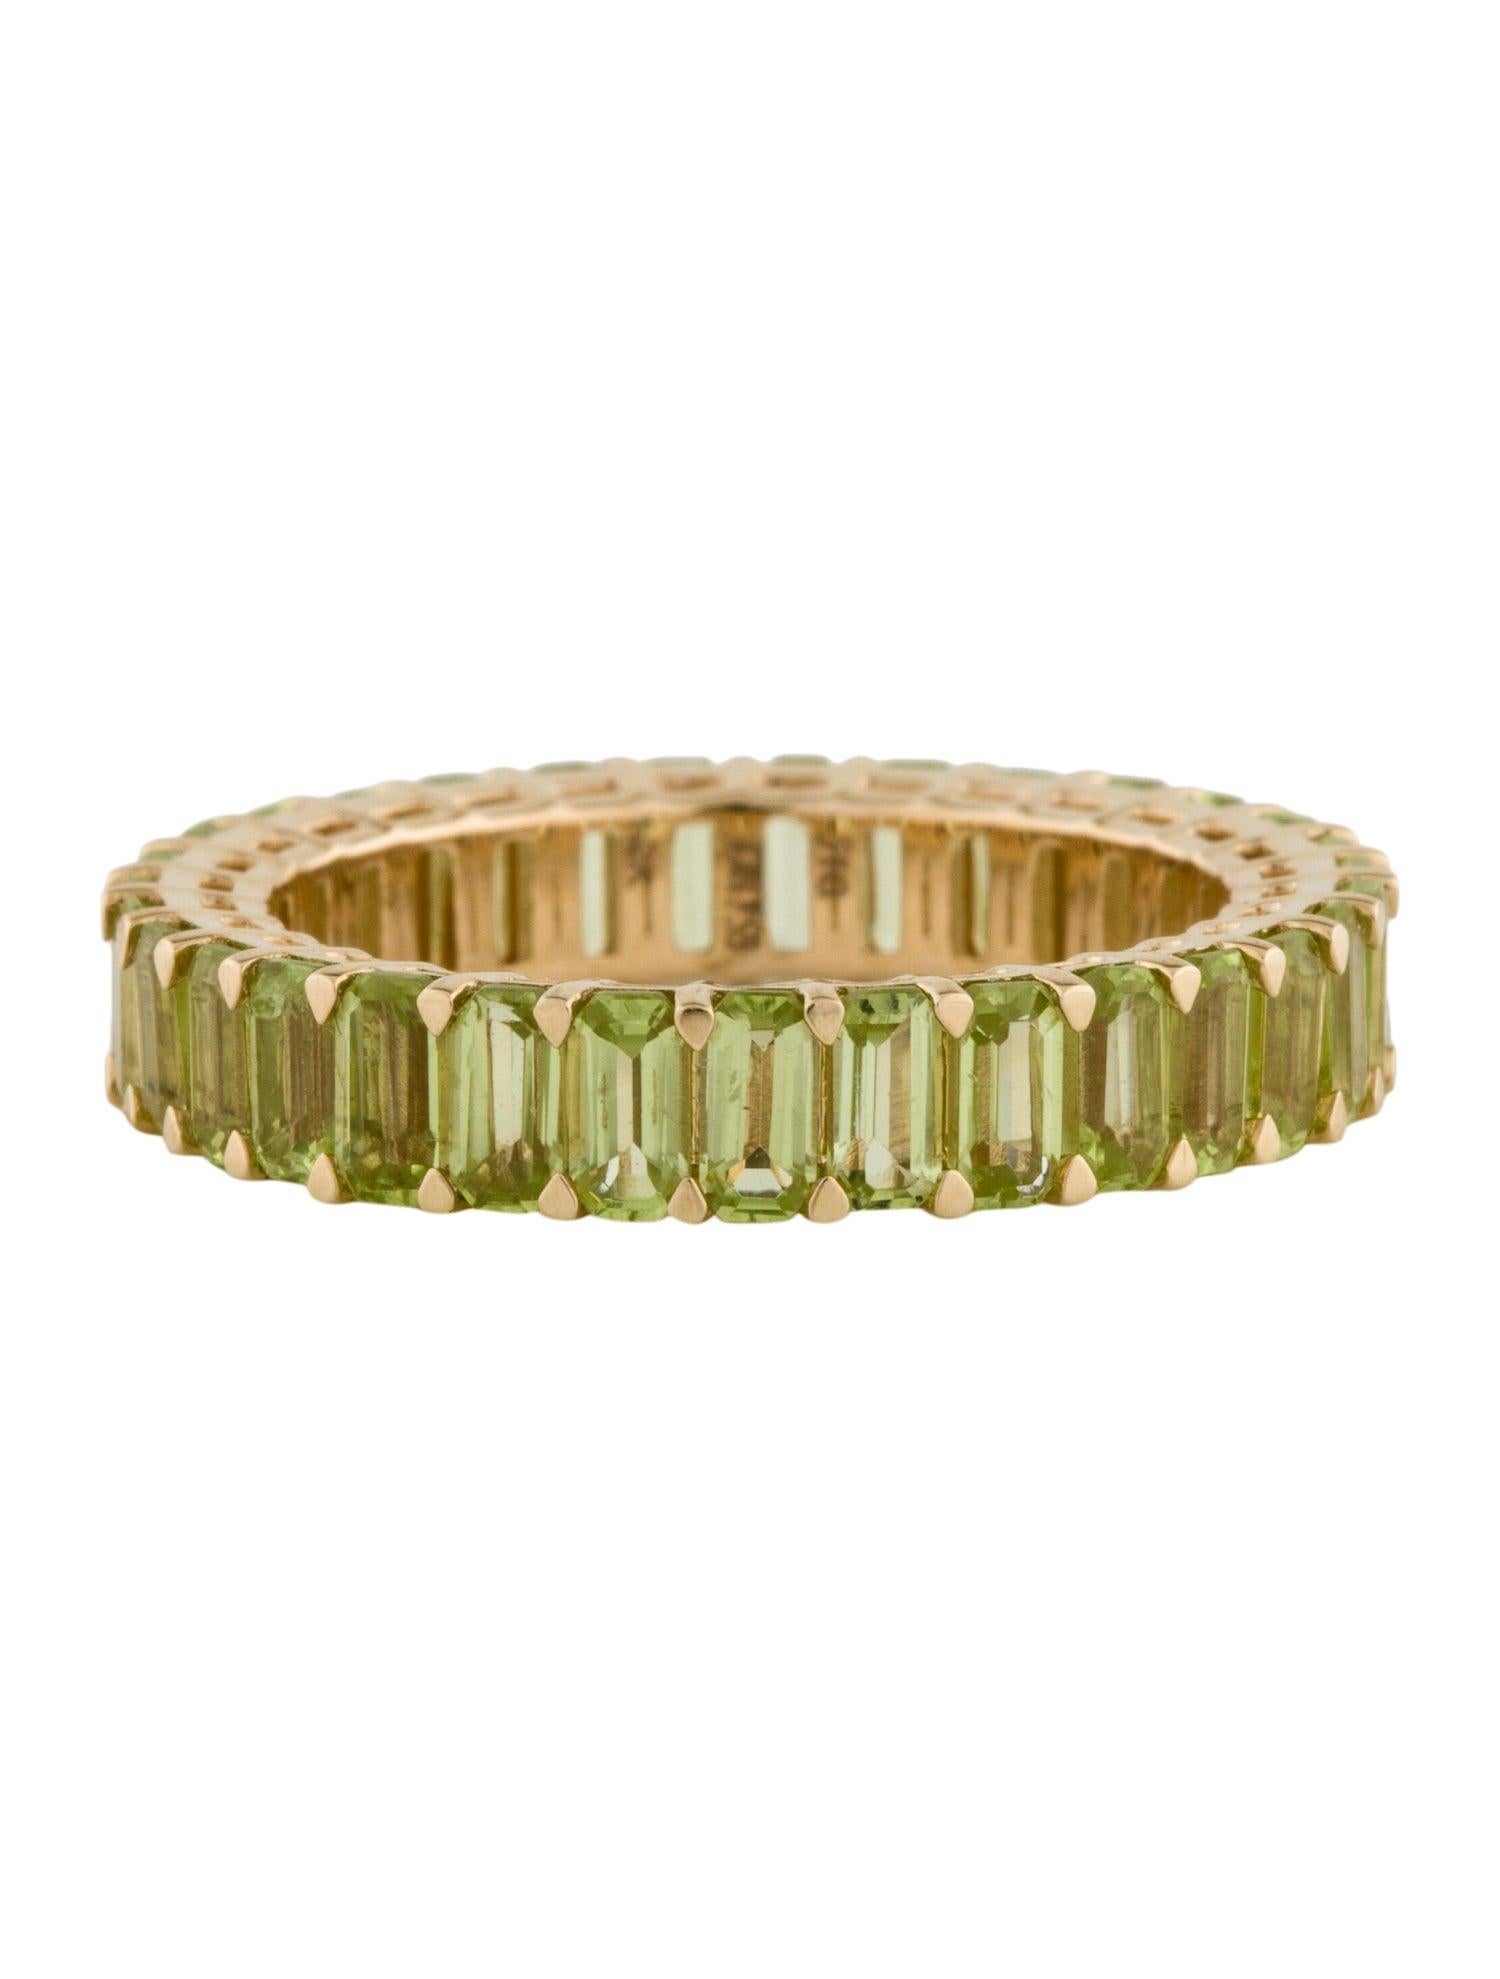 Elegance meets tranquility in our Harmony in Green Peridot Octagon Ring. Carefully crafted in 14k Yellow Gold, this exquisite piece is a testament to the natural beauty that surrounds us. The centerpiece, a pristine 4.22 Carat Peridot gemstone, is